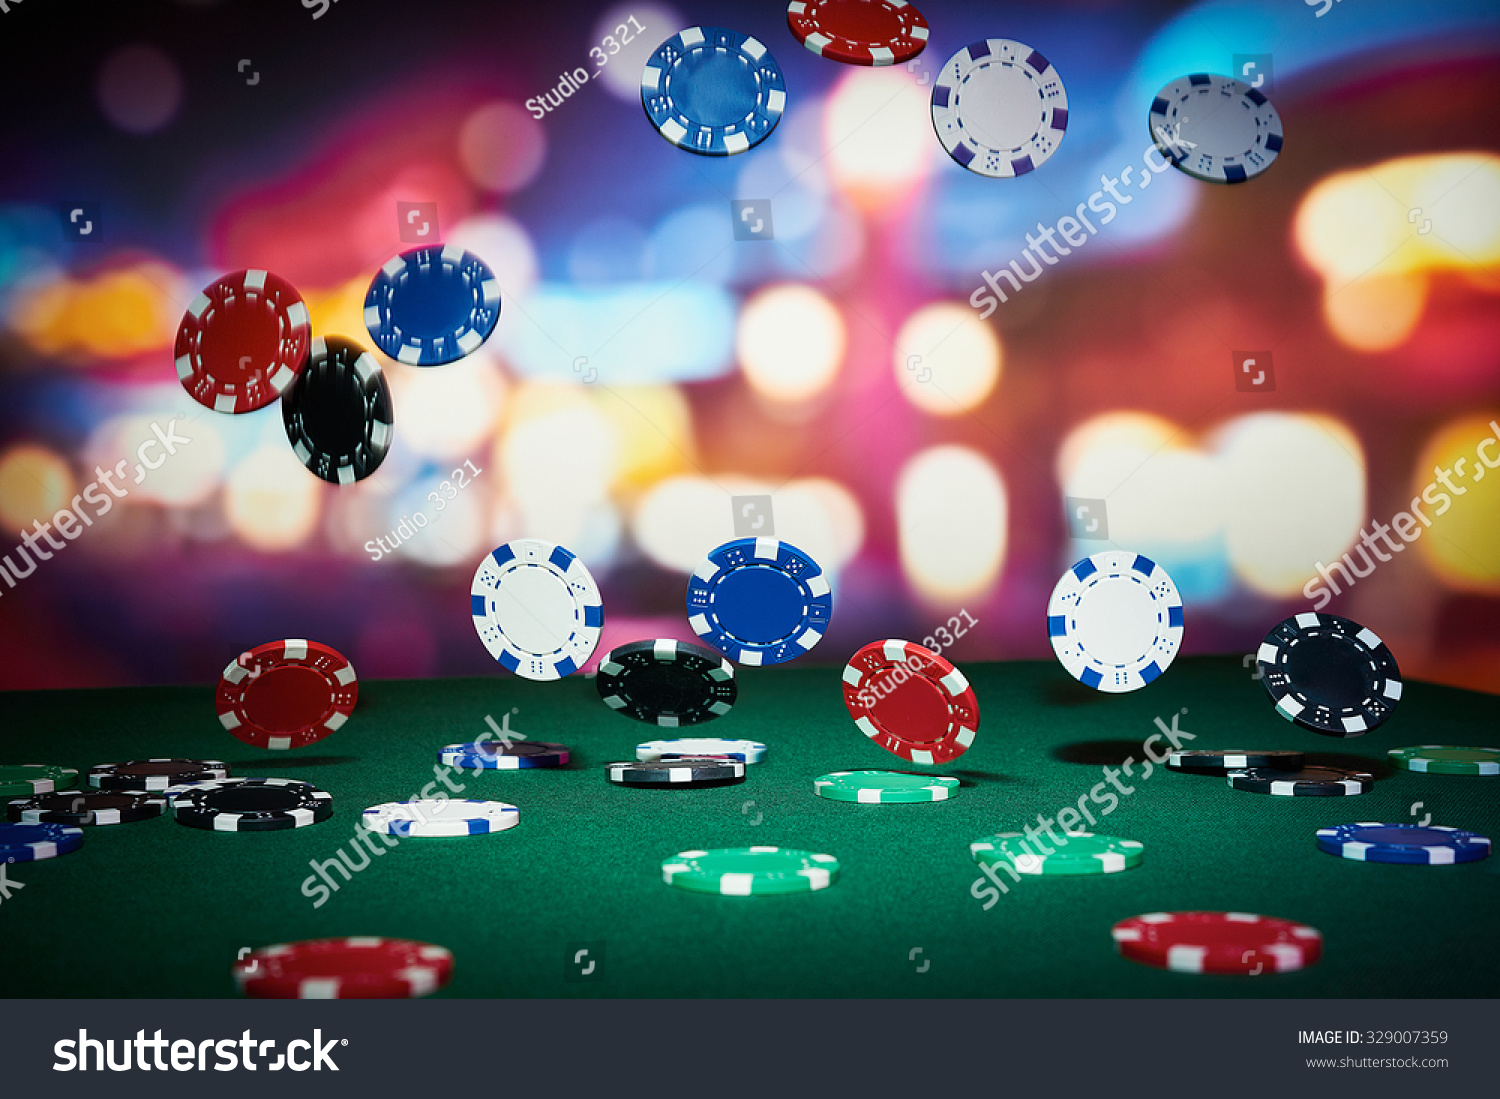 Poker chips on table in casino #329007359